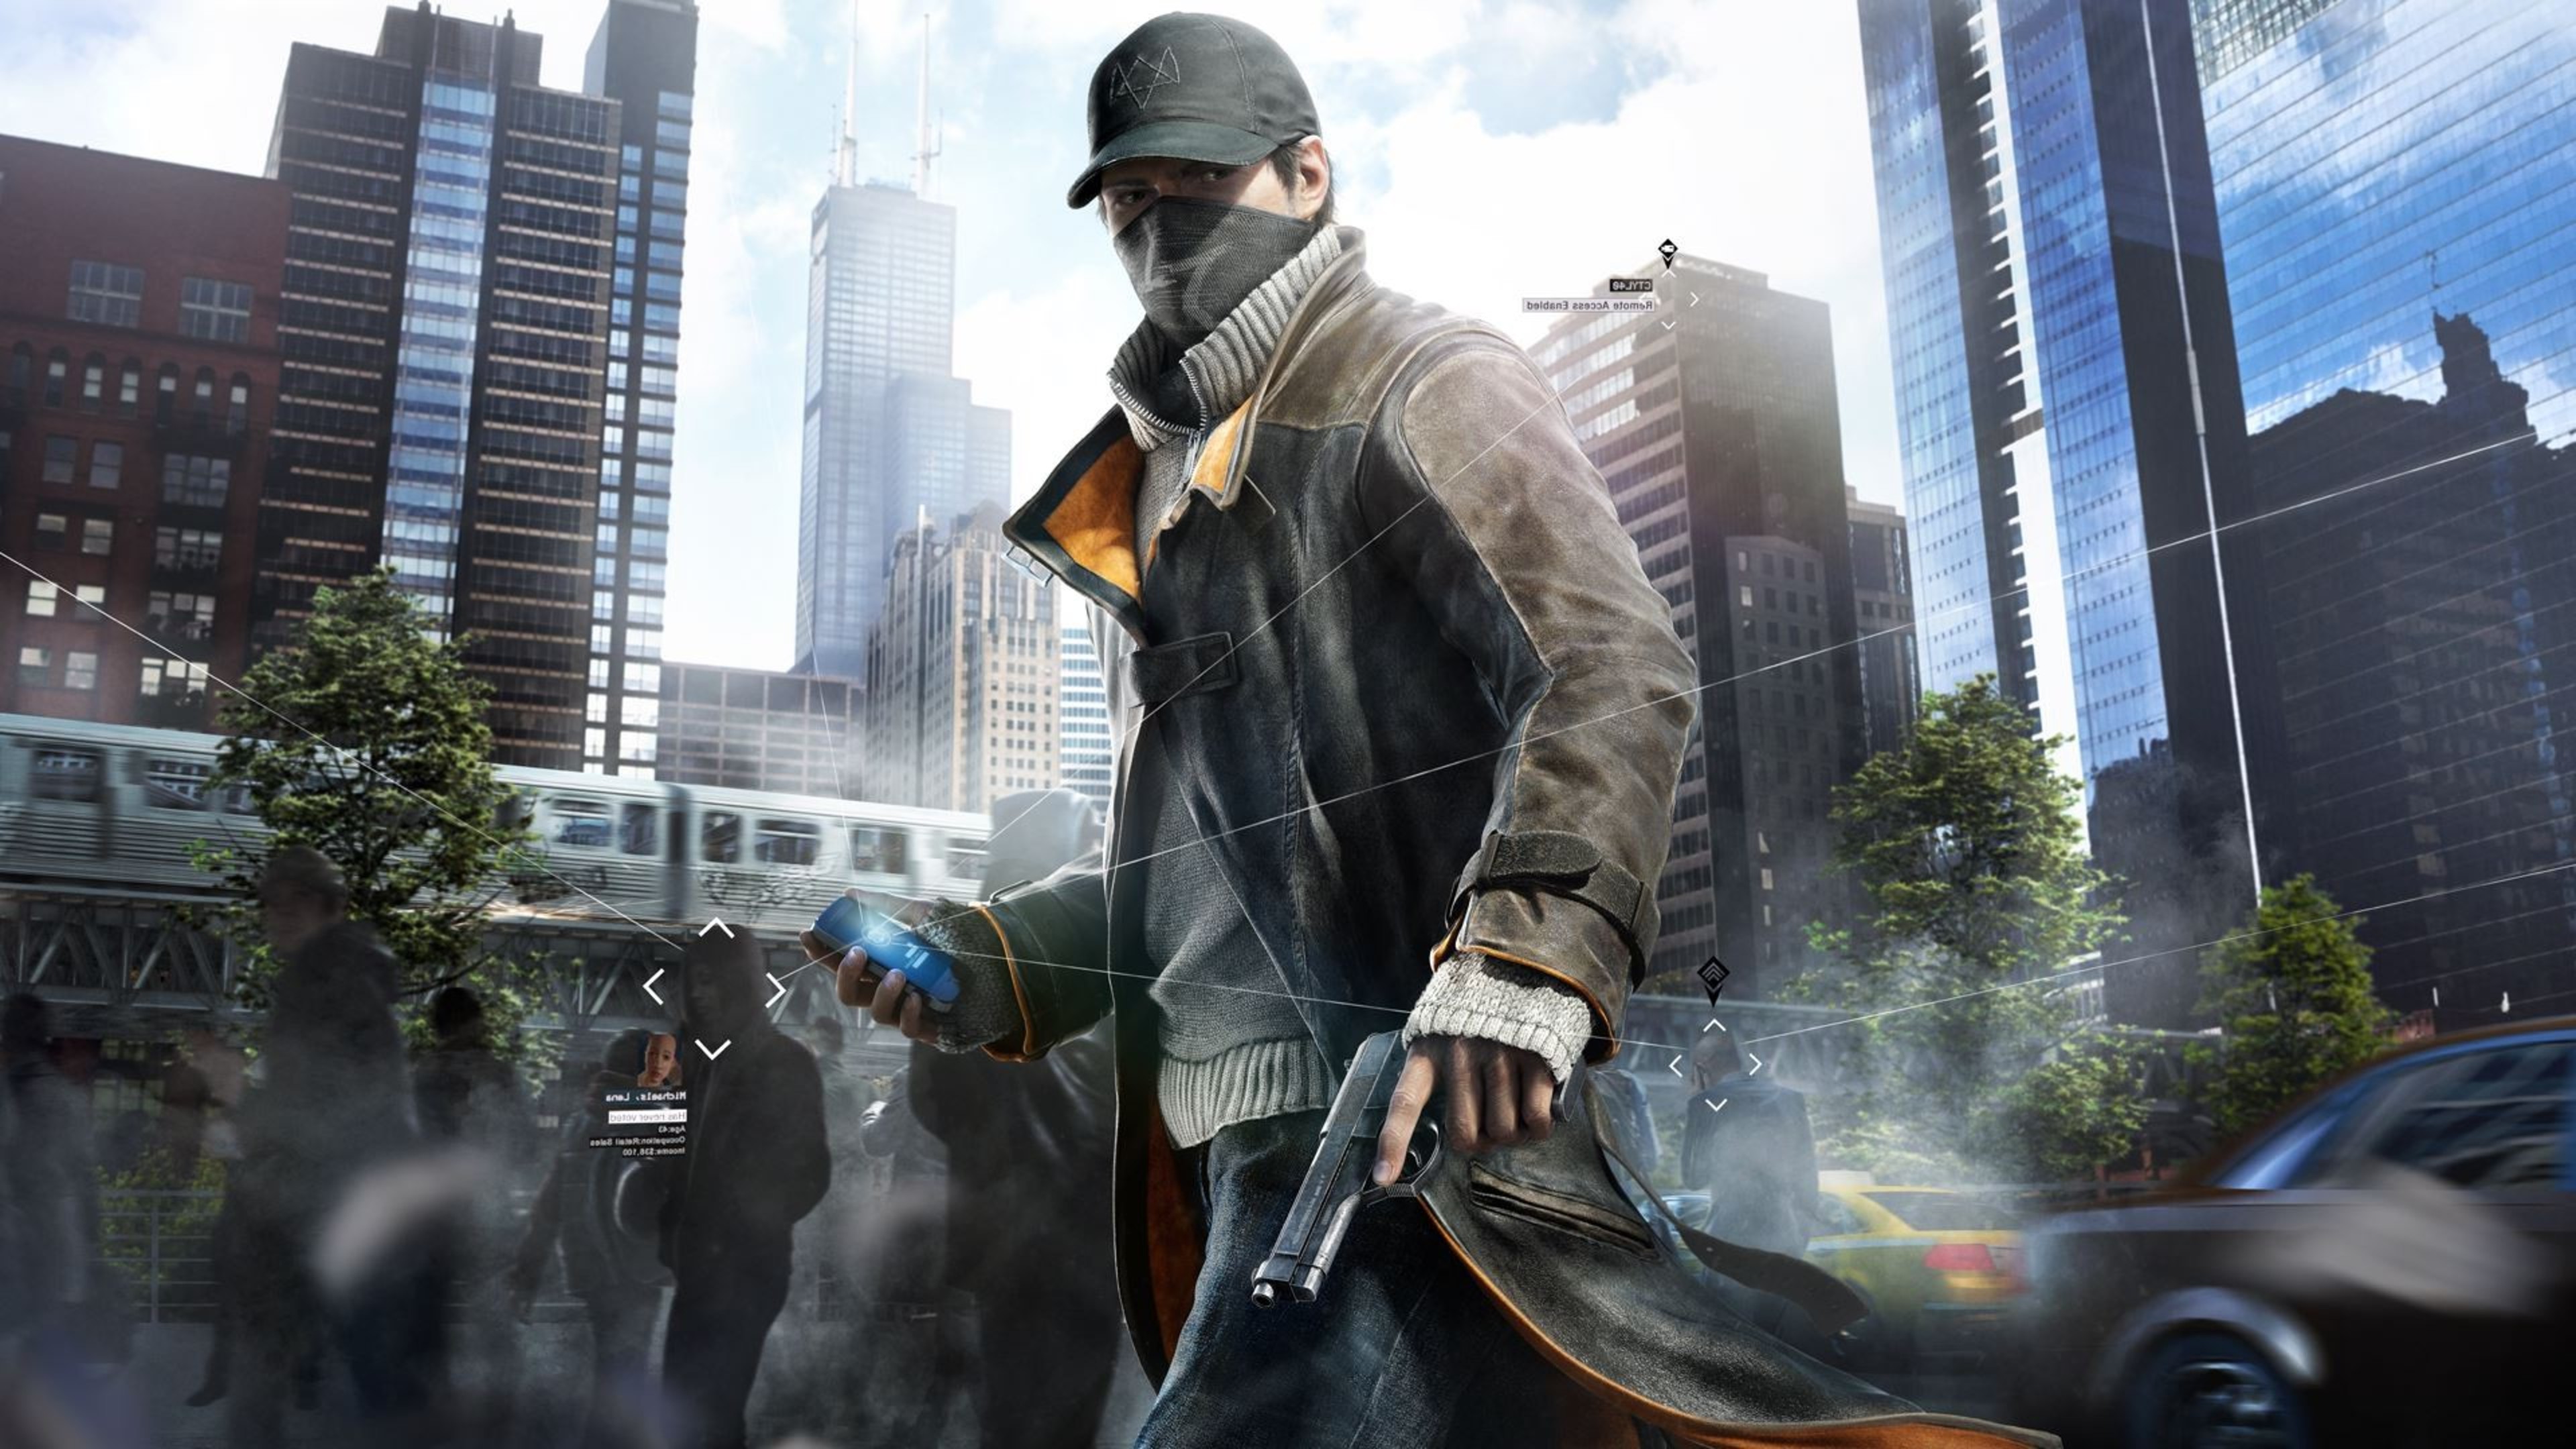 watch dogs 2 wallpaper 4k,action adventure game,pc game,games,outerwear,screenshot